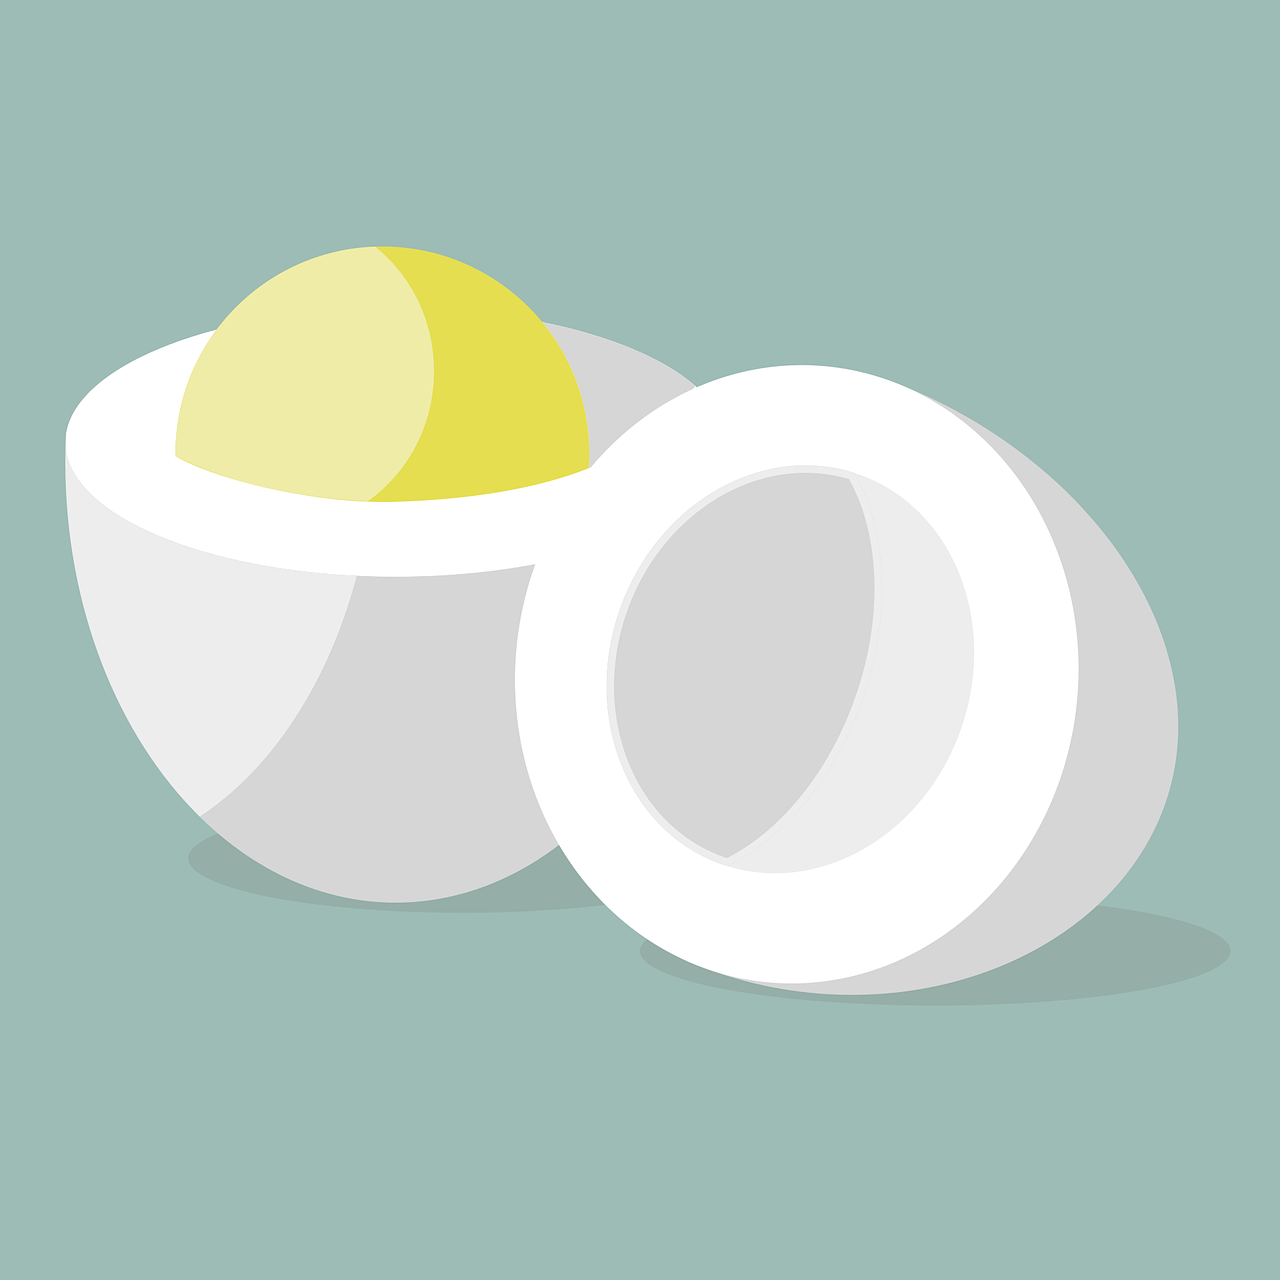 a couple of eggs sitting next to each other, an illustration of, art deco, simple and clean illustration, lemonlight, spherical lens, flat color